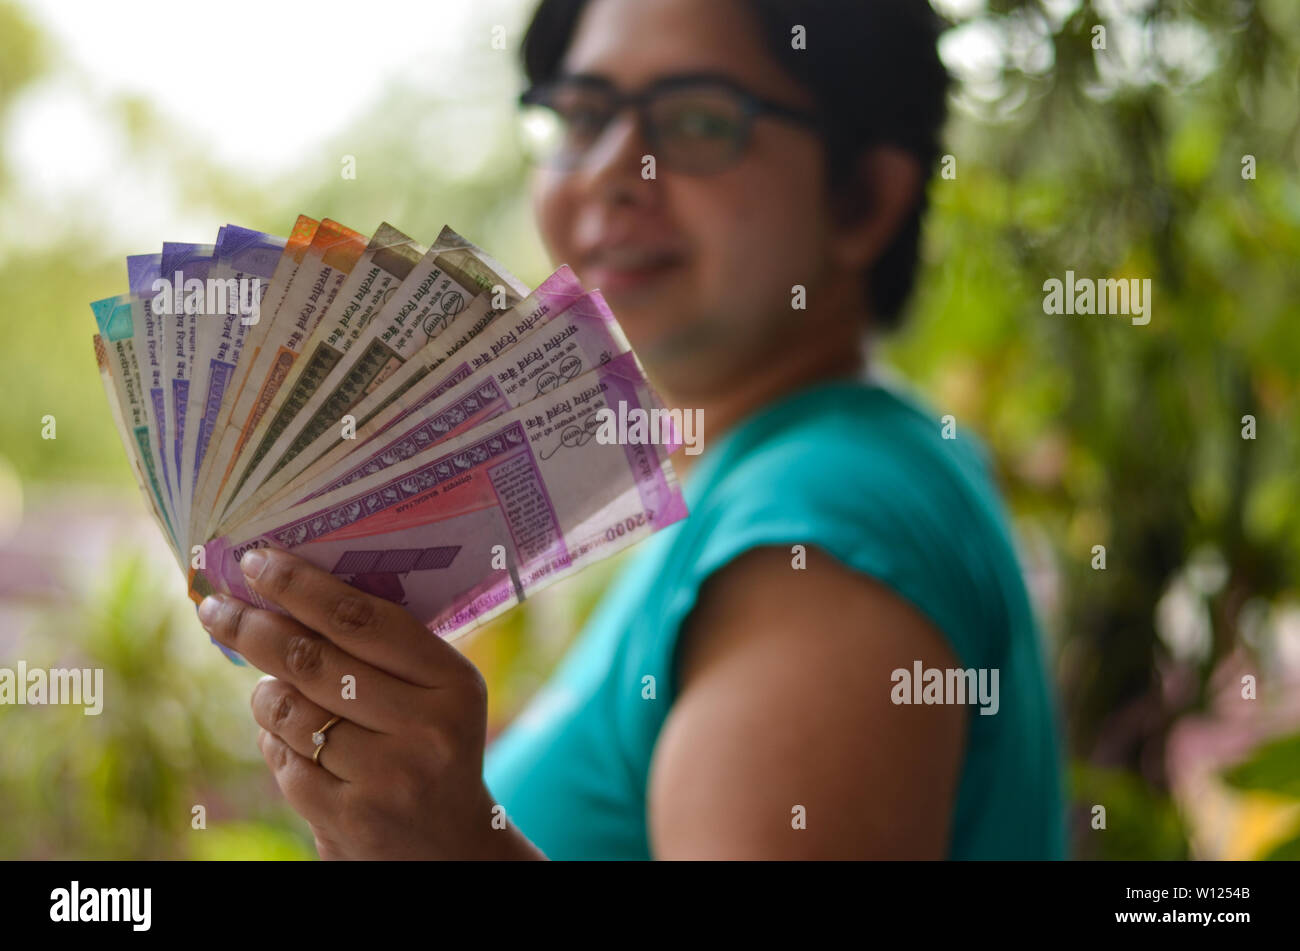 An Indian women holding all the colorful new released Indian Rupees currency notes after demonetisation in denominations Stock Photo